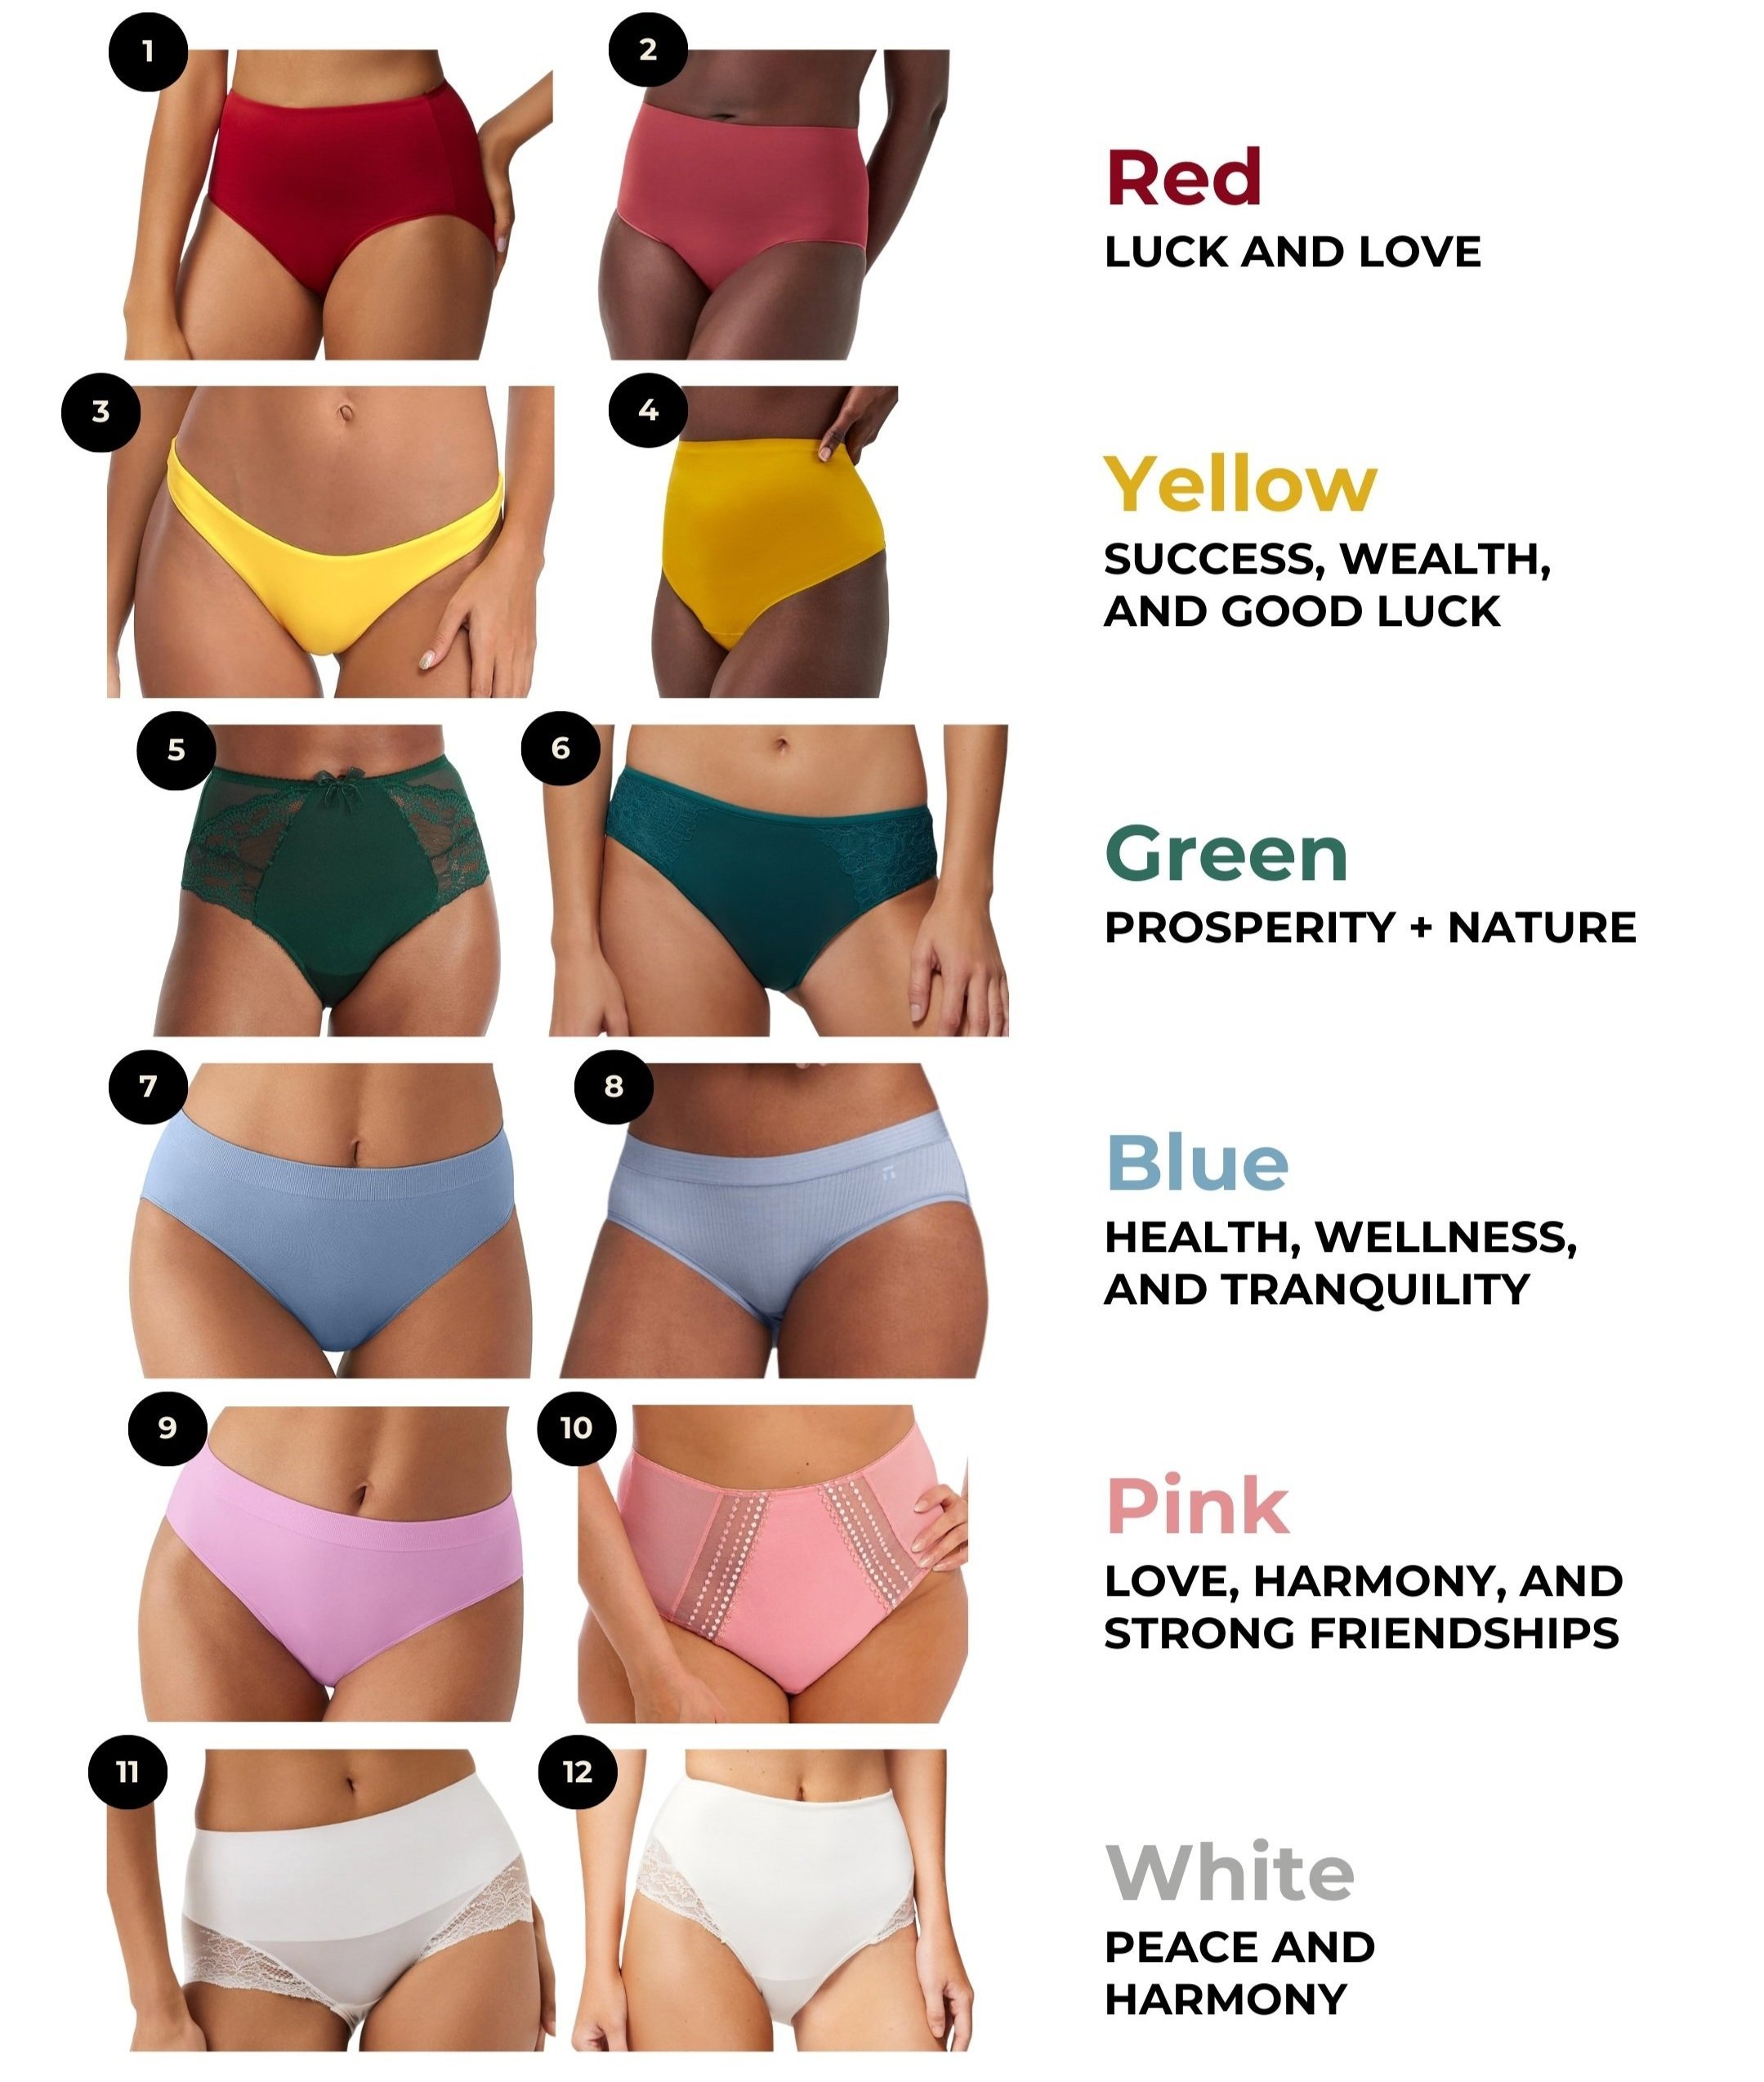 New Year's Eve Traditions: These Underwear Colors Will Give You A Luckier  2020!